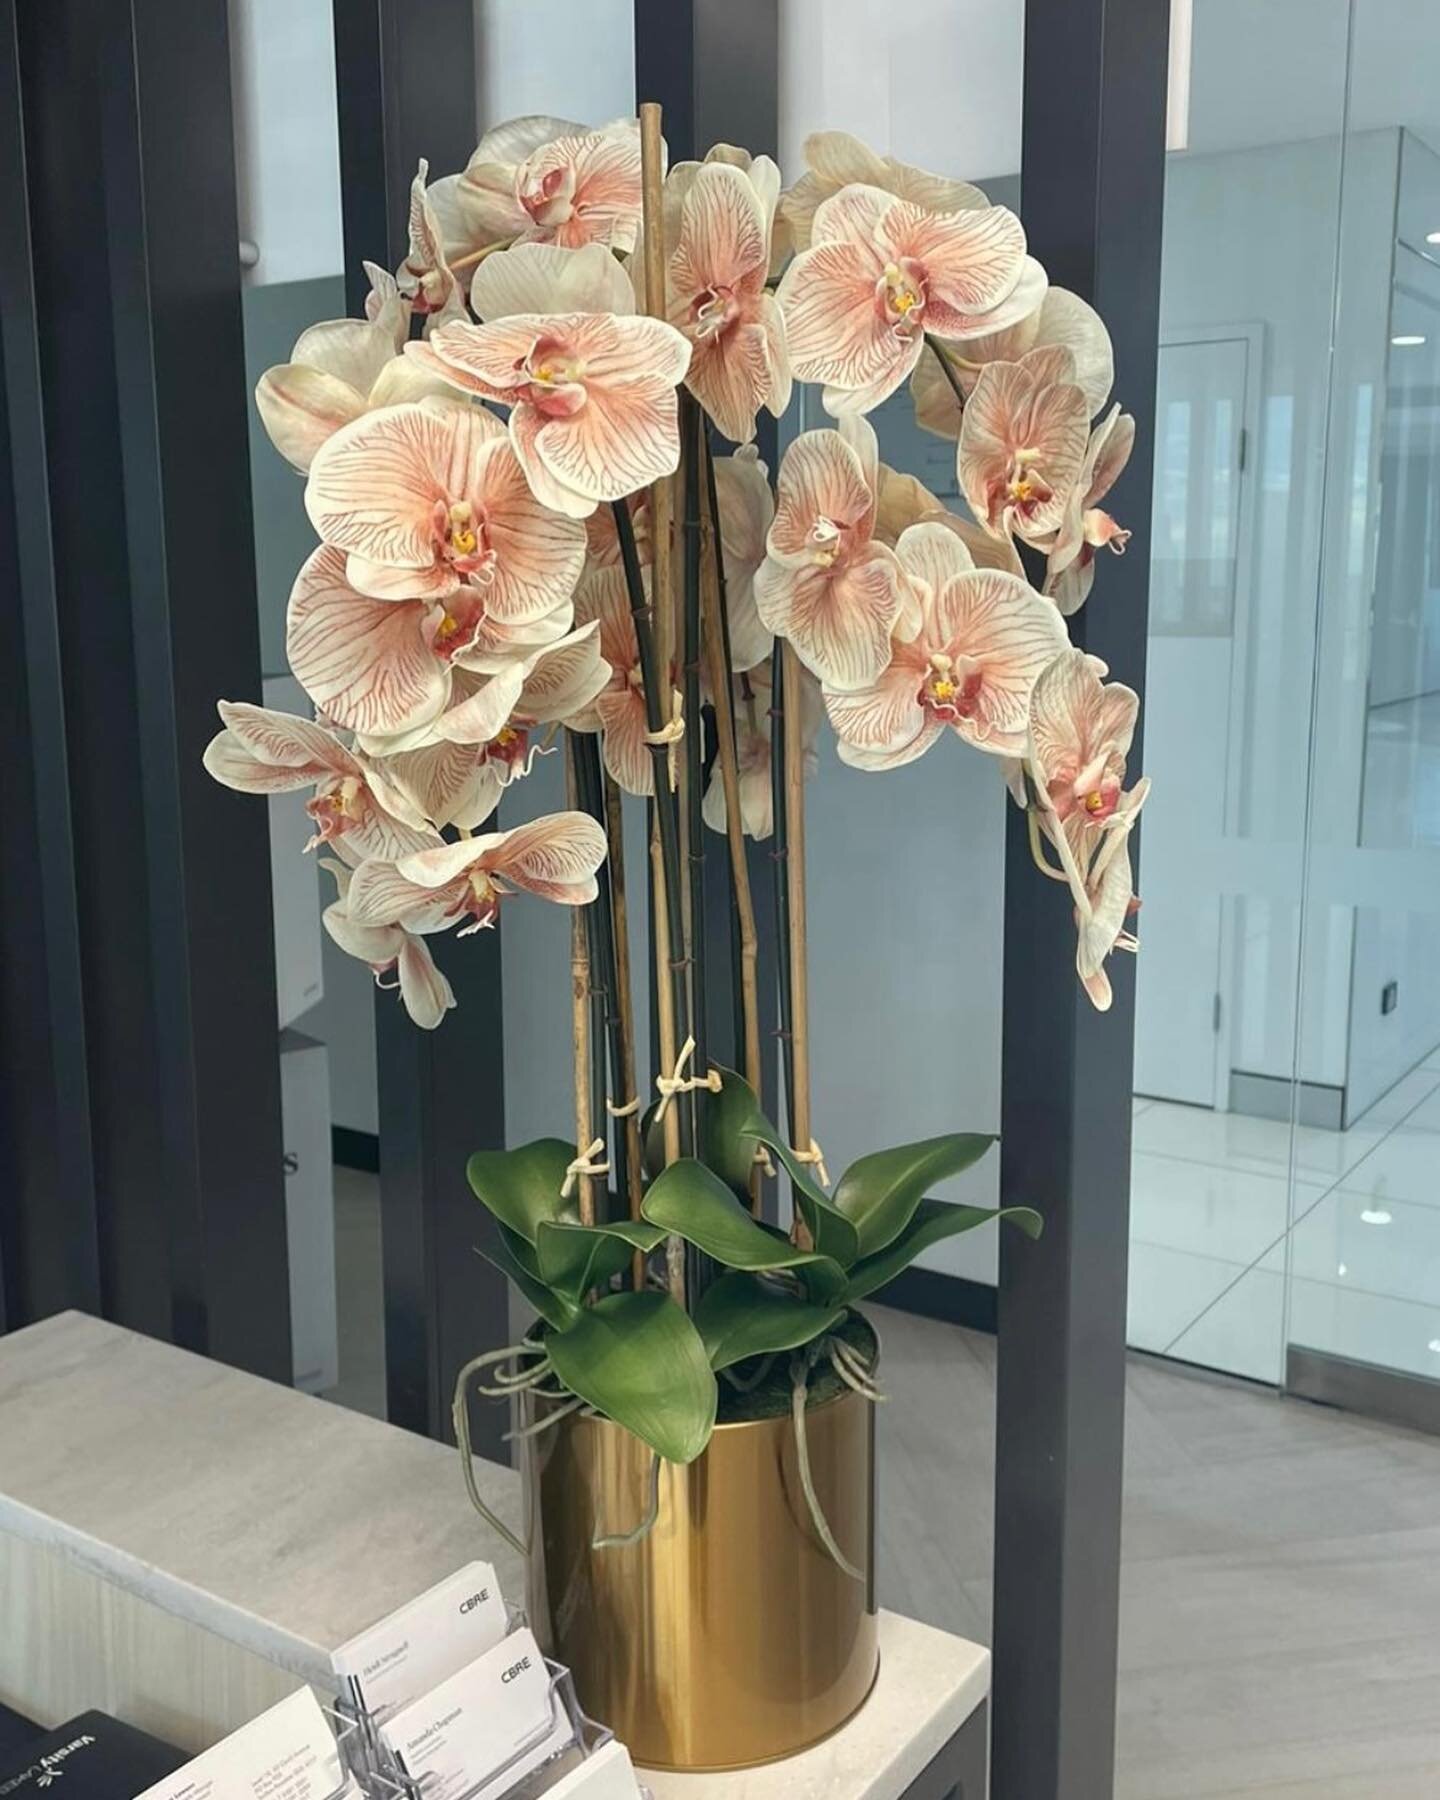 All our arrangements are beautifully handcrafted and assembled in Australia to the highest standards 🧡🌷🧡